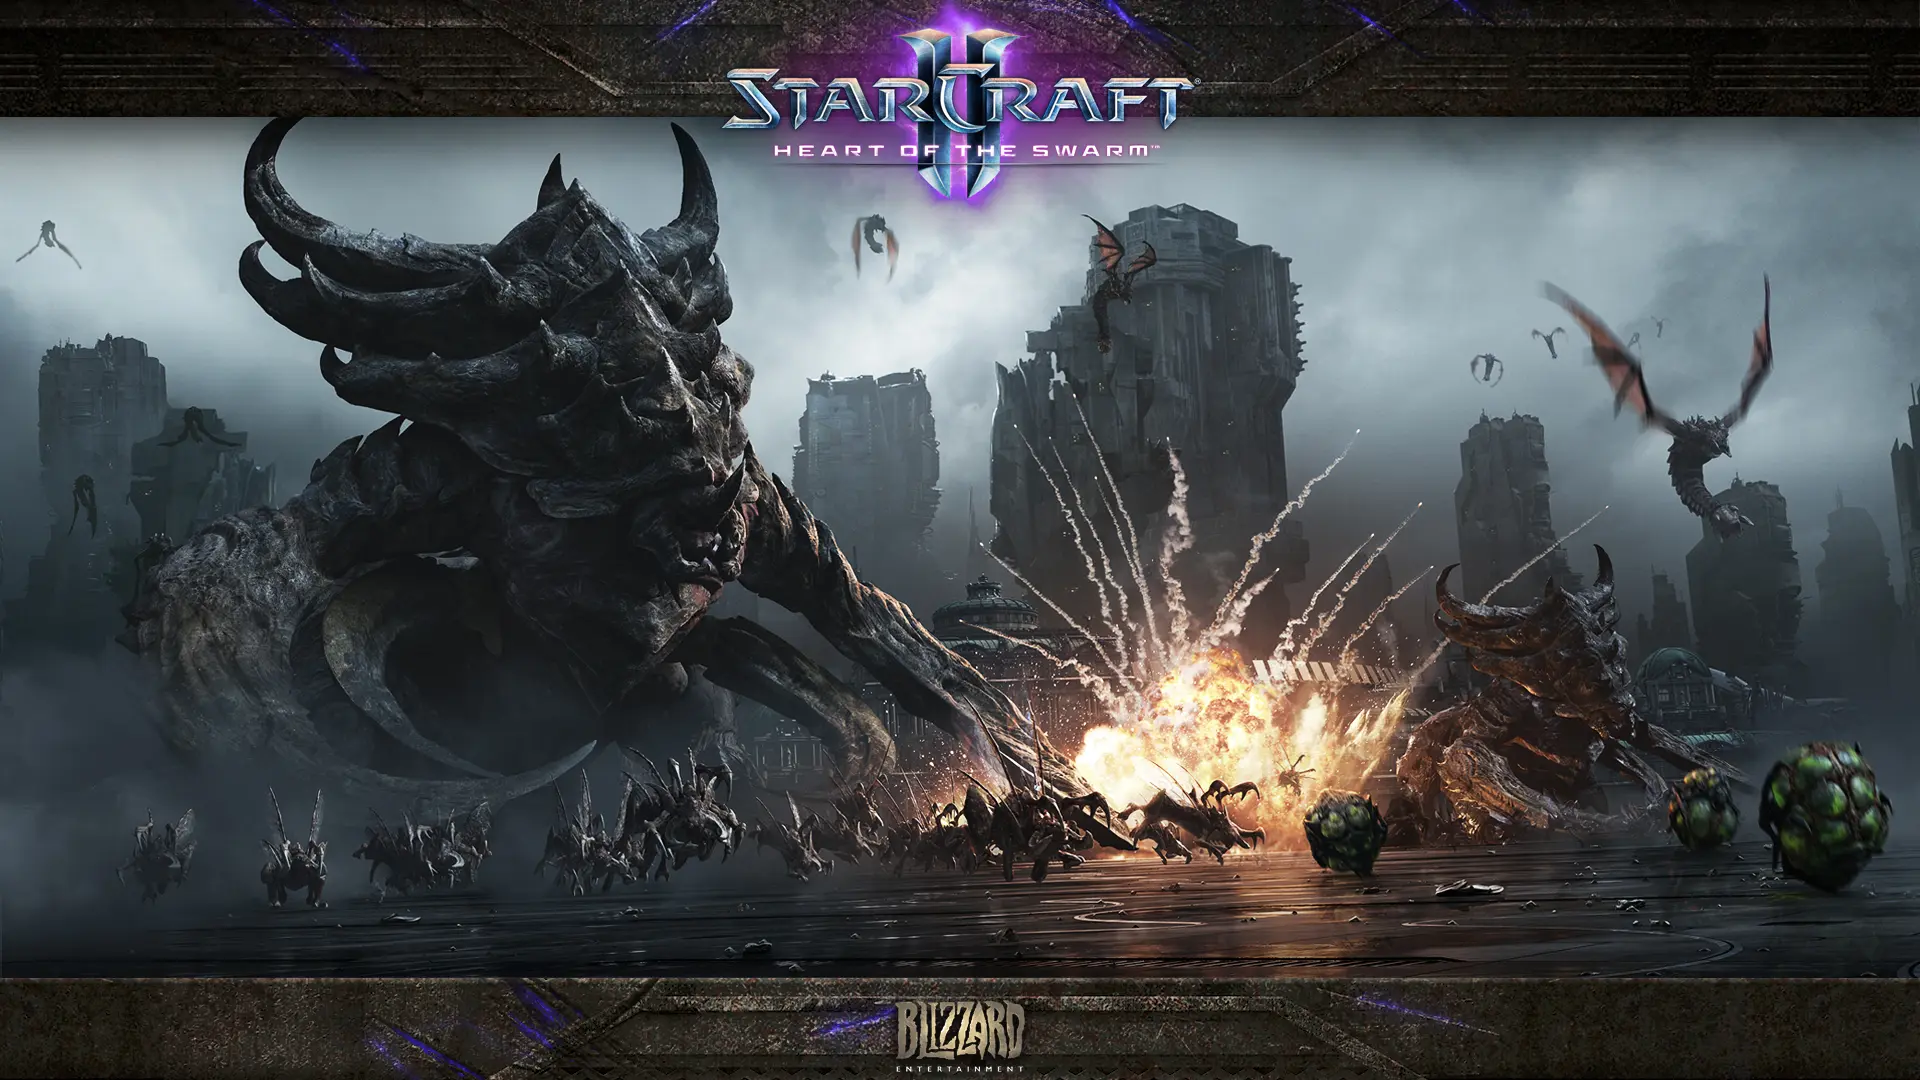 Game Starcraft 2 Heart of the Swarm wallpaper 22 | Background Image